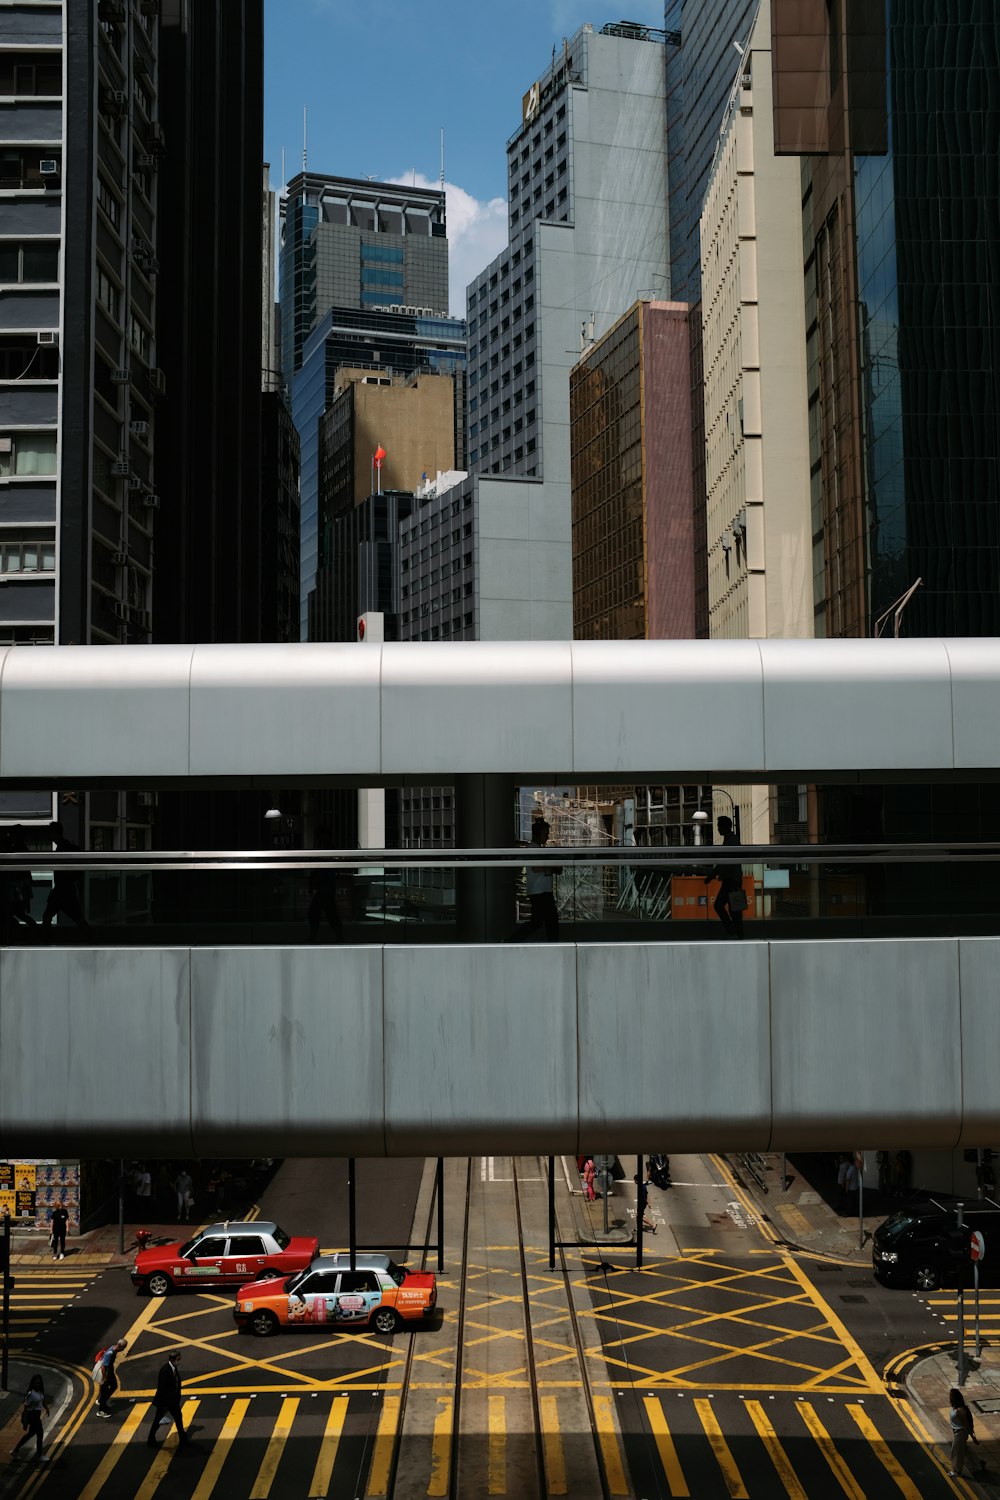 a train traveling through a city next to tall buildings